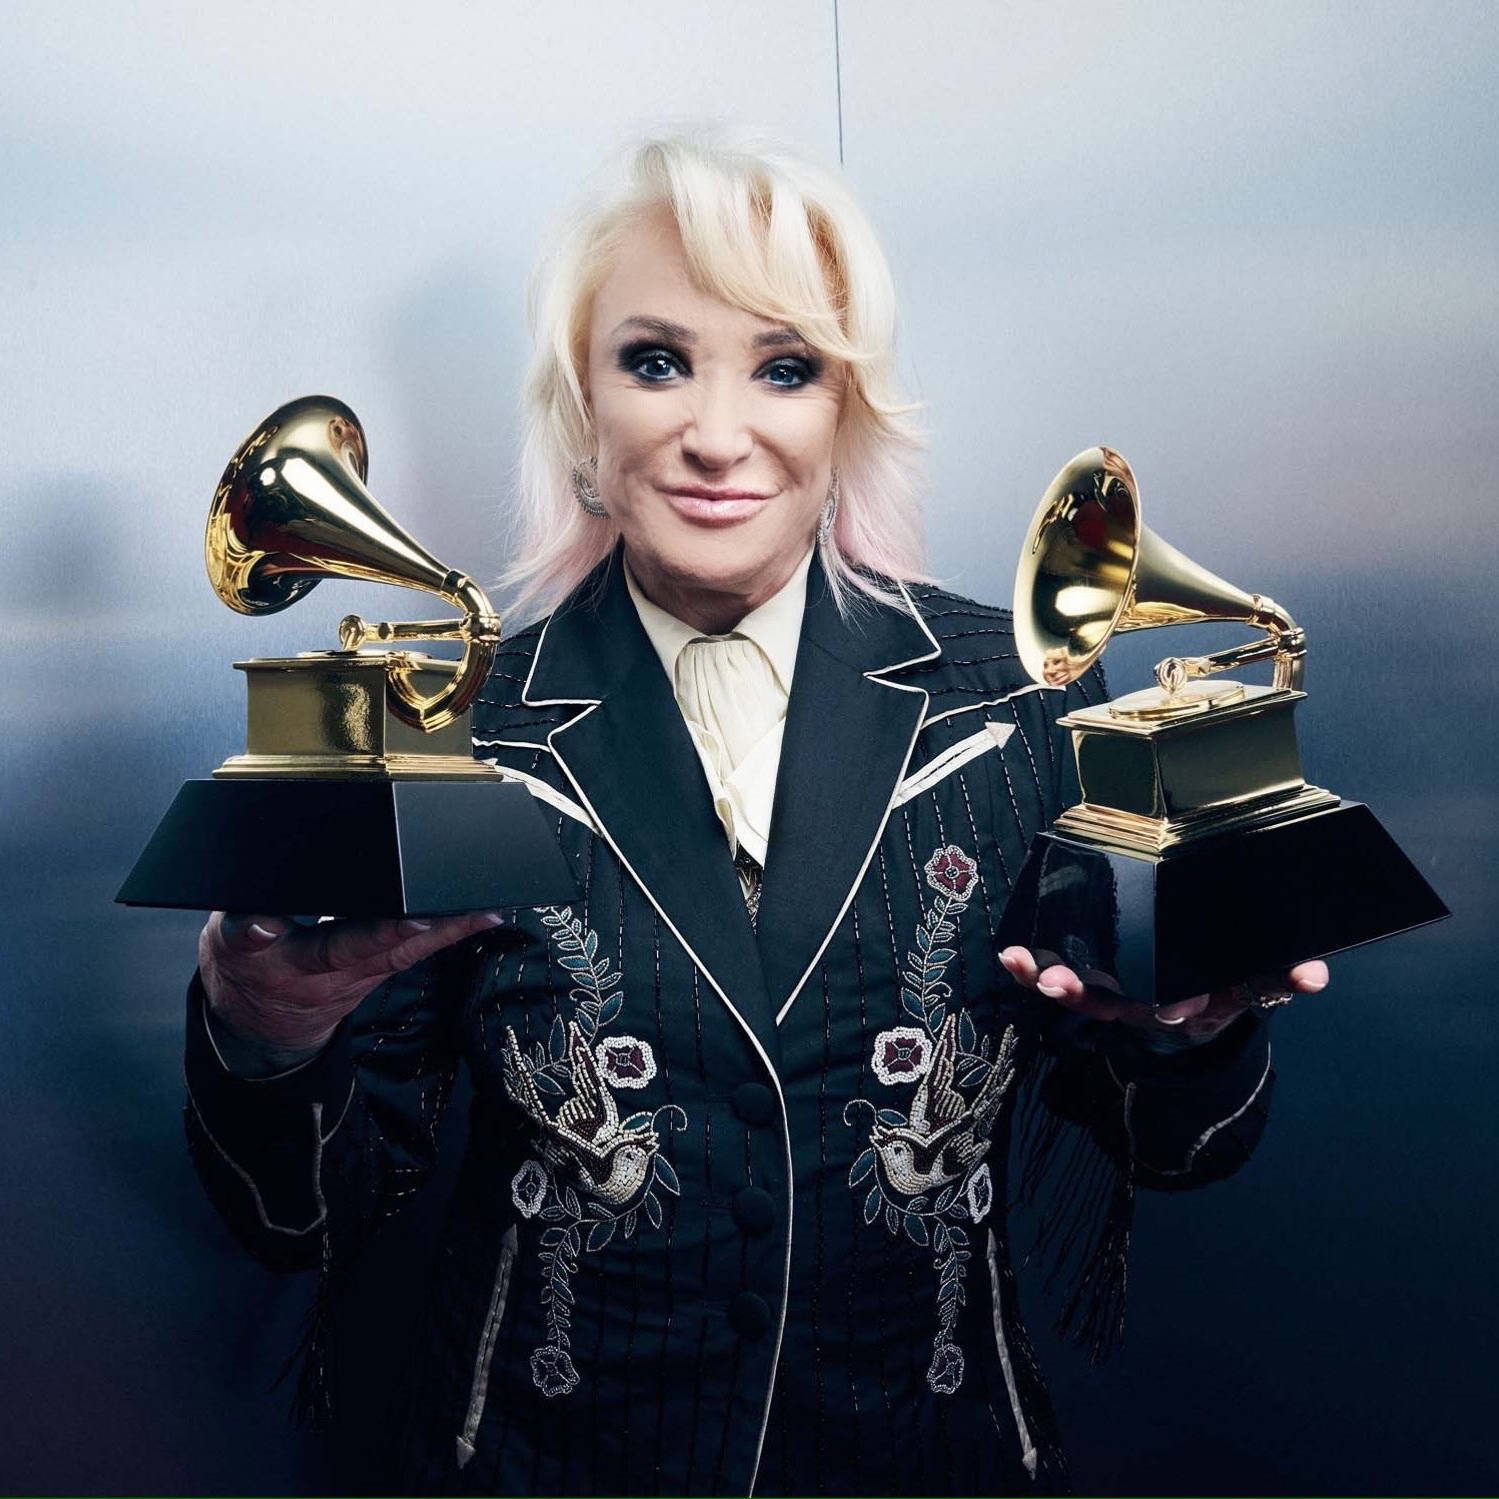 Reliving the Grammy's with Tanya Tucker